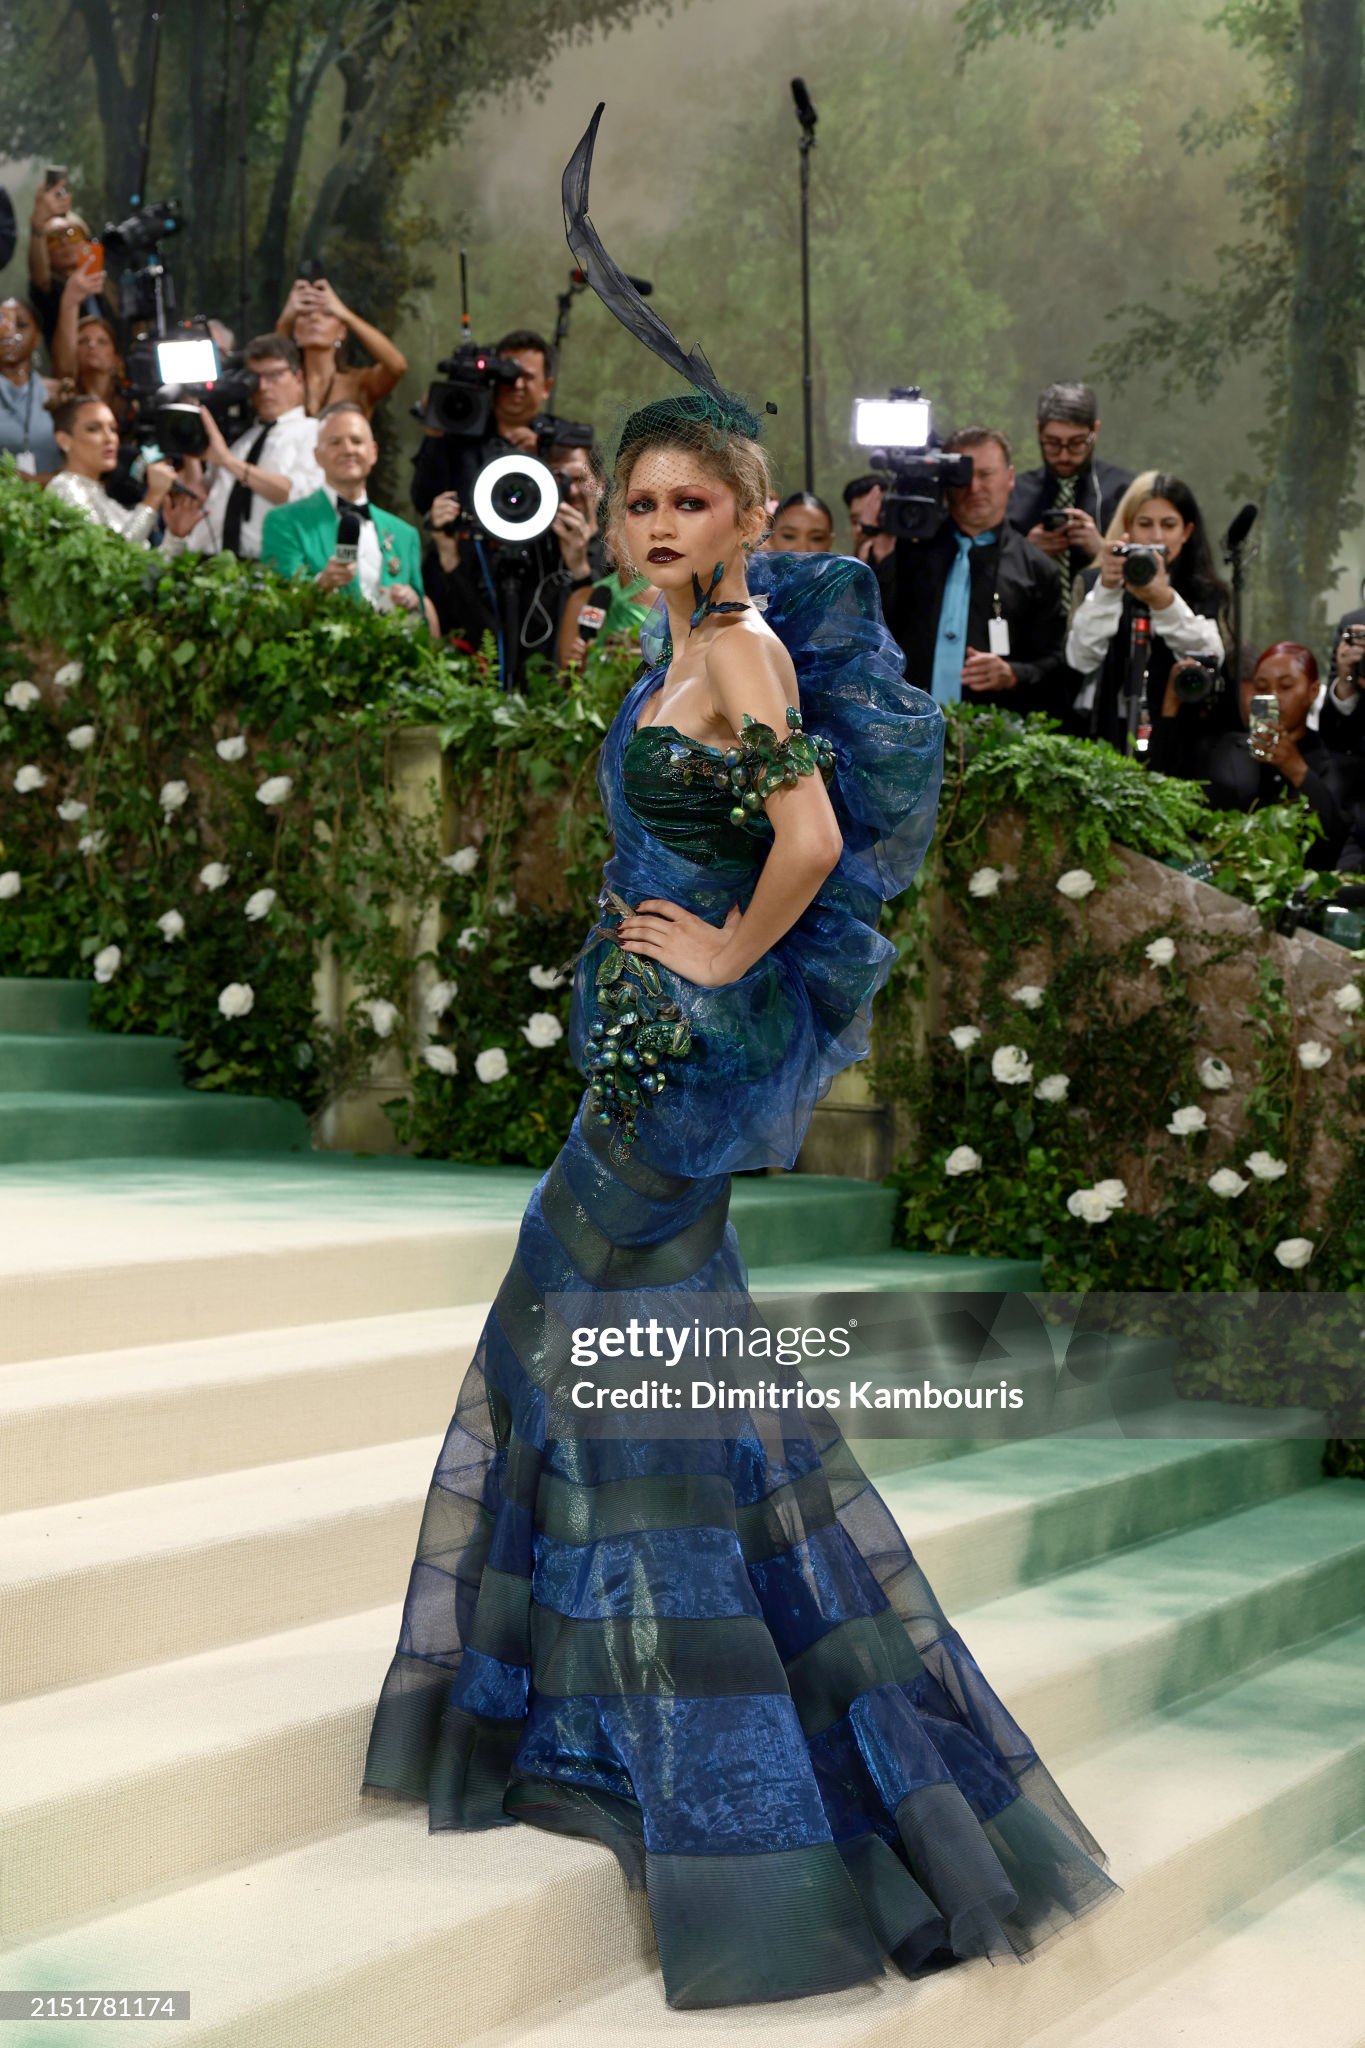 gettyimages-2151781174-2048x2048.jpg